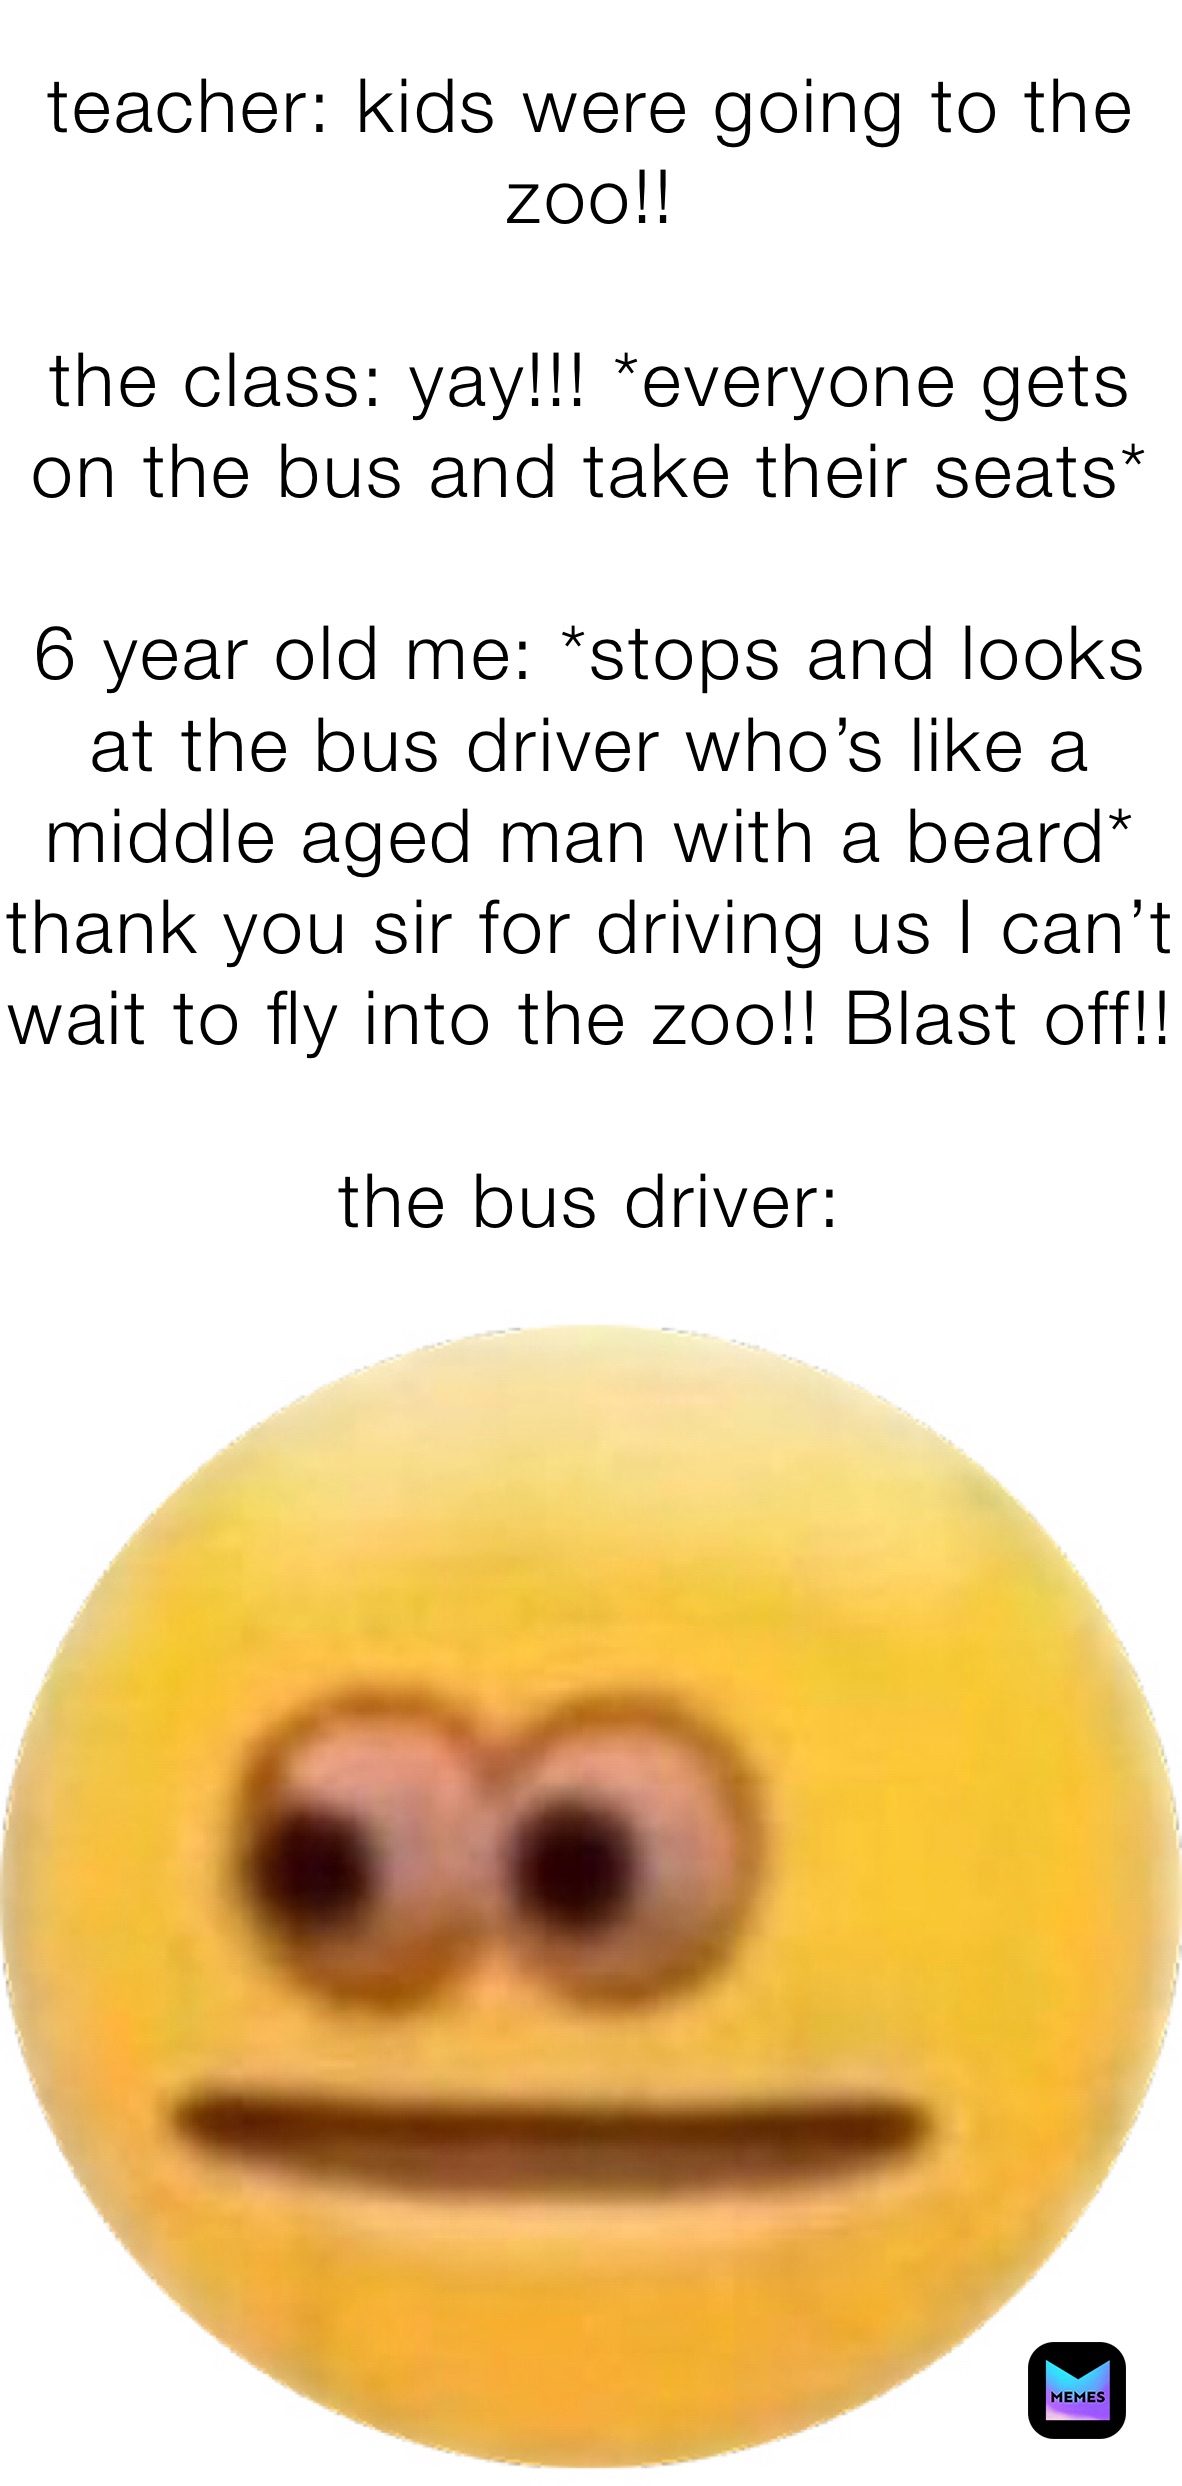 teacher: kids were going to the zoo!!

the class: yay!!! *everyone gets on the bus and take their seats*

6 year old me: *stops and looks at the bus driver who’s like a middle aged man with a beard* thank you sir for driving us I can’t wait to fly into the zoo!! Blast off!!

the bus driver: